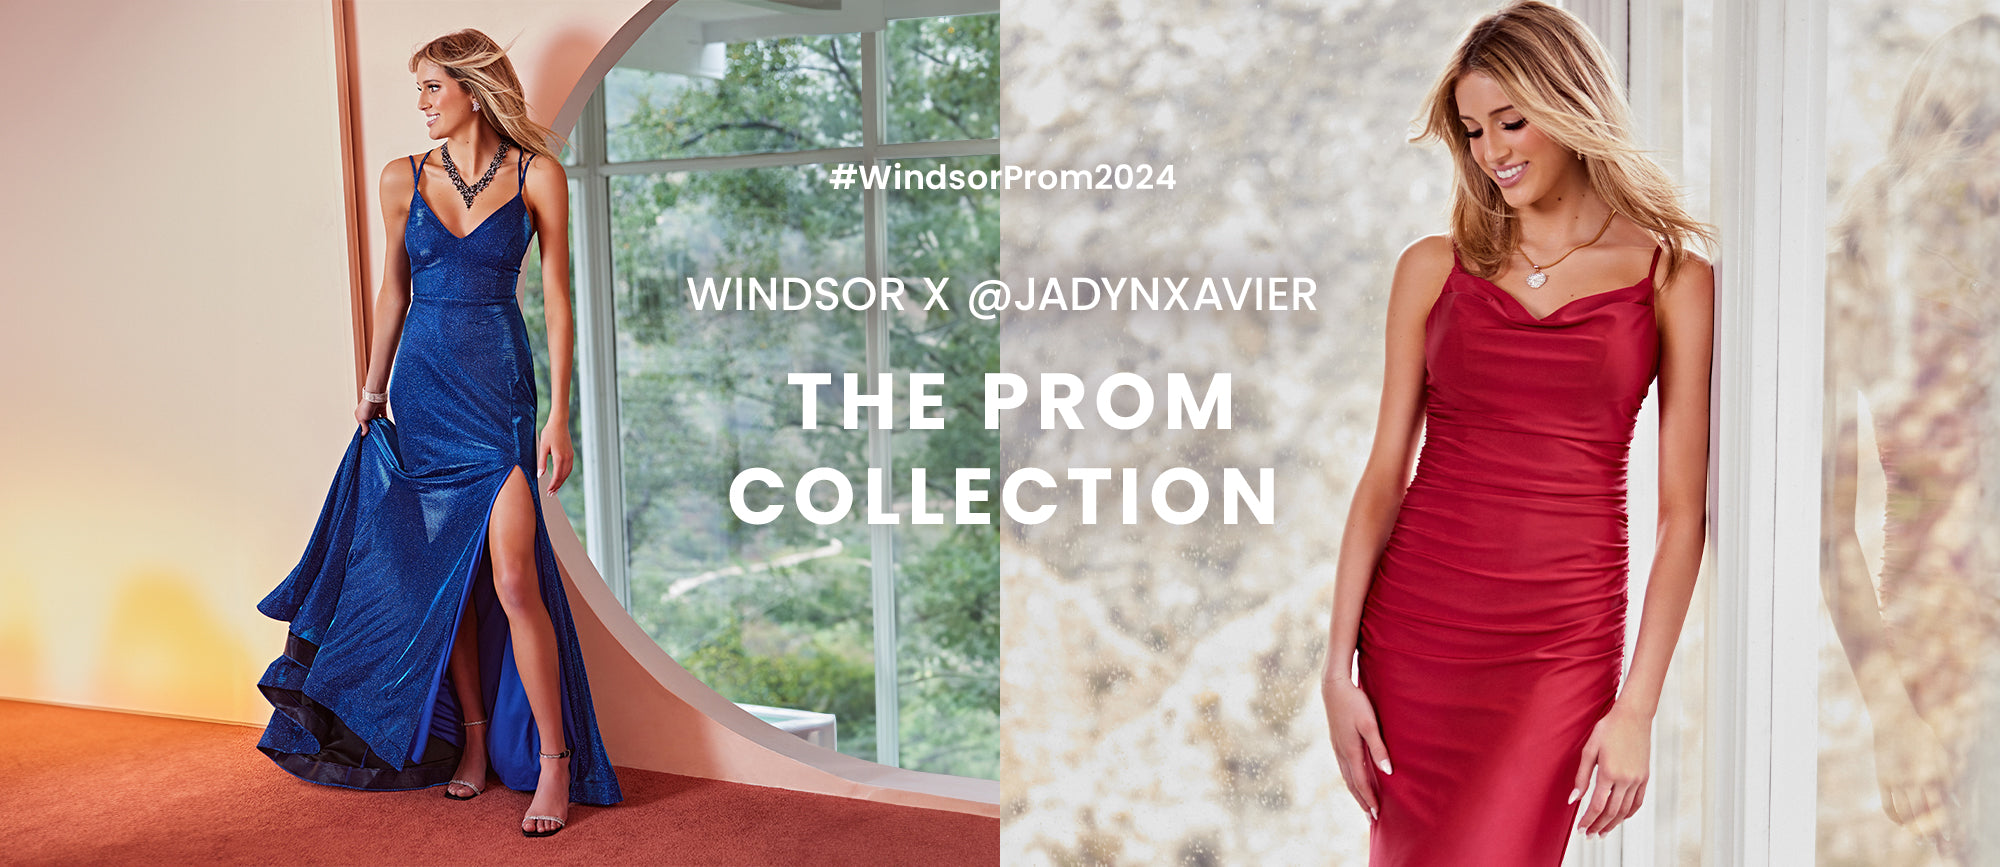 Shop 2024 prom dresses & outfit ideas picked by TikTok influencer @jadynxavier featuring prom dresses in a variety of colors like red or blue, elevated fabrics including glitter or satin, & complementing prom jewelry and shoes!